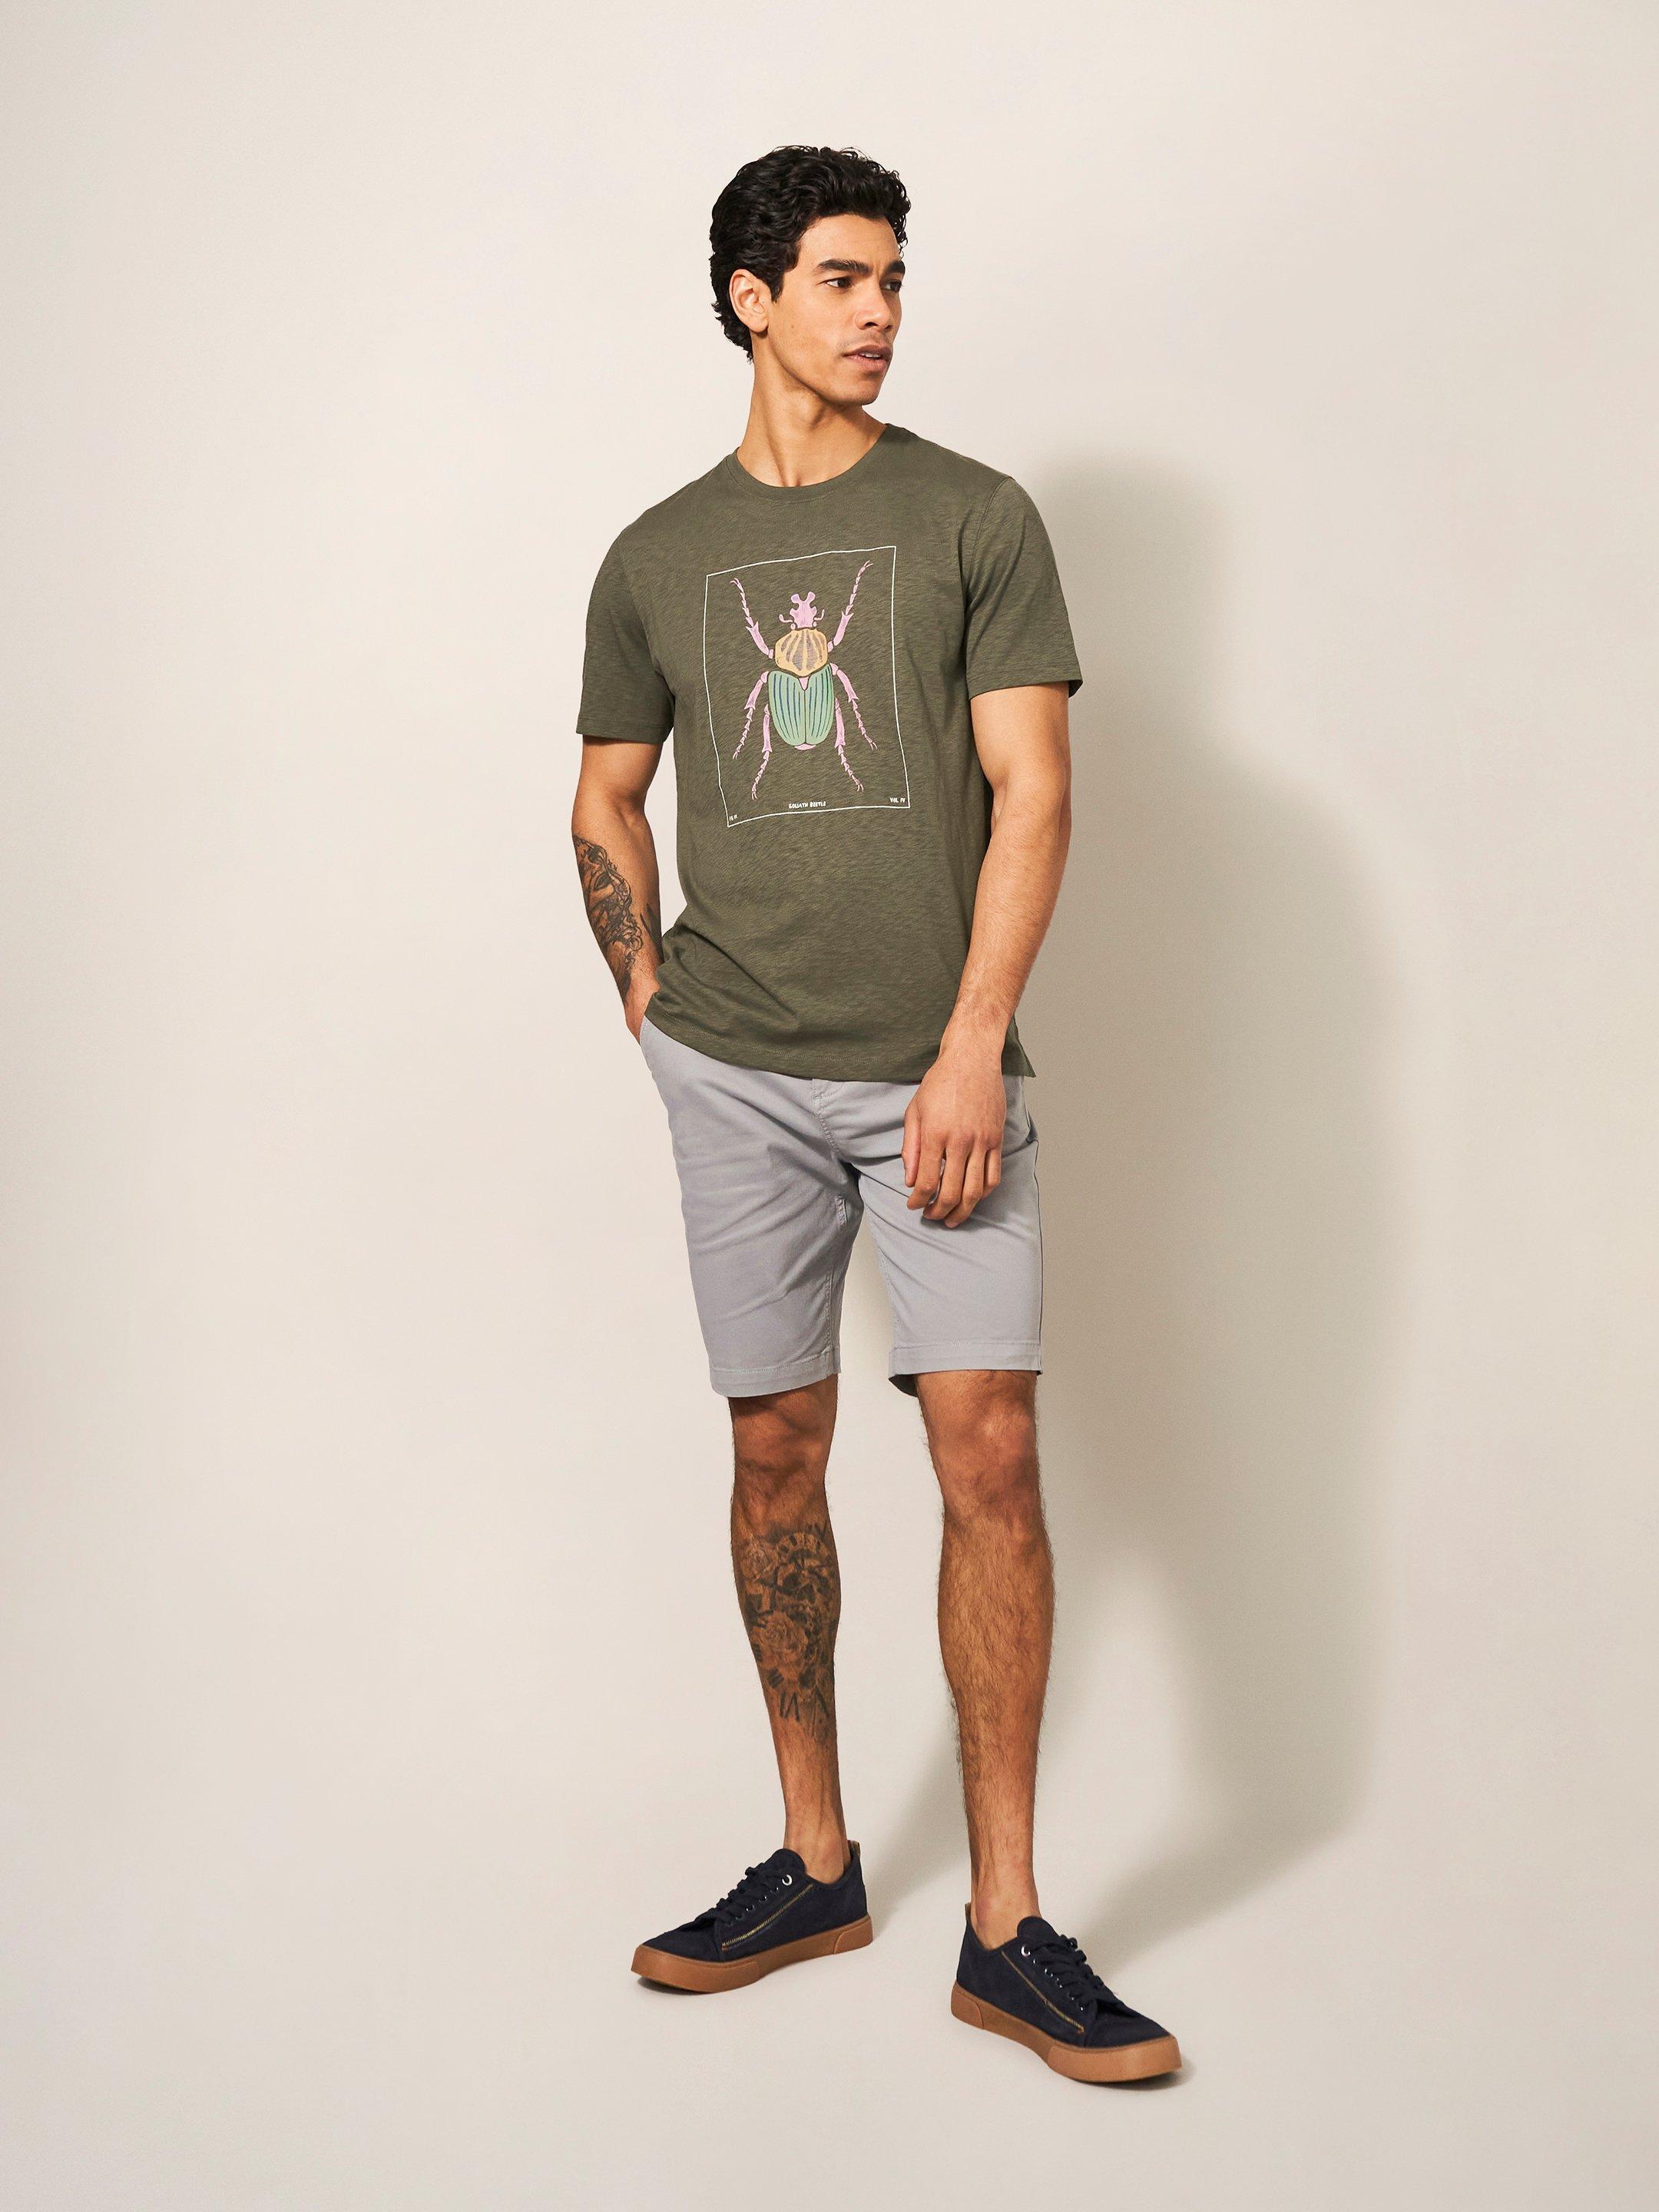 Goliath Beetle Graphic Tee in KHAKI GRN - MODEL FRONT